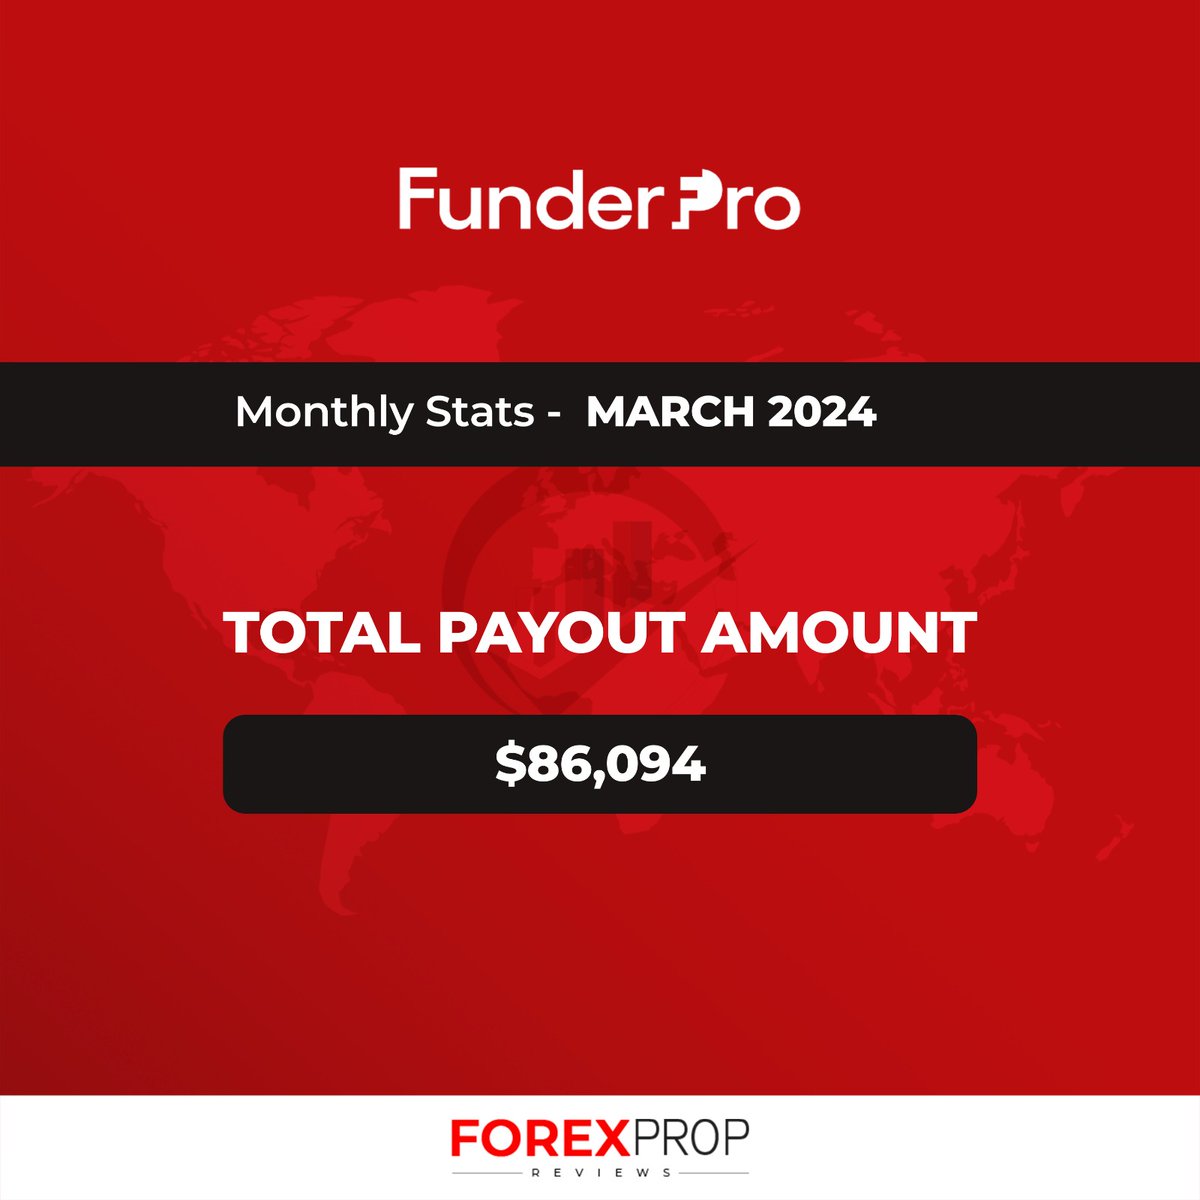 📊 Attention all traders! The highly anticipated FunderPro monthly stats for March 2024 are here. 🙌🏽 Check out their impressive Total Payout amount and more. Head over to our website now for more detailed information. 
#PropFirms #ForexPropReviews #FunderPro #Stats #Payouts